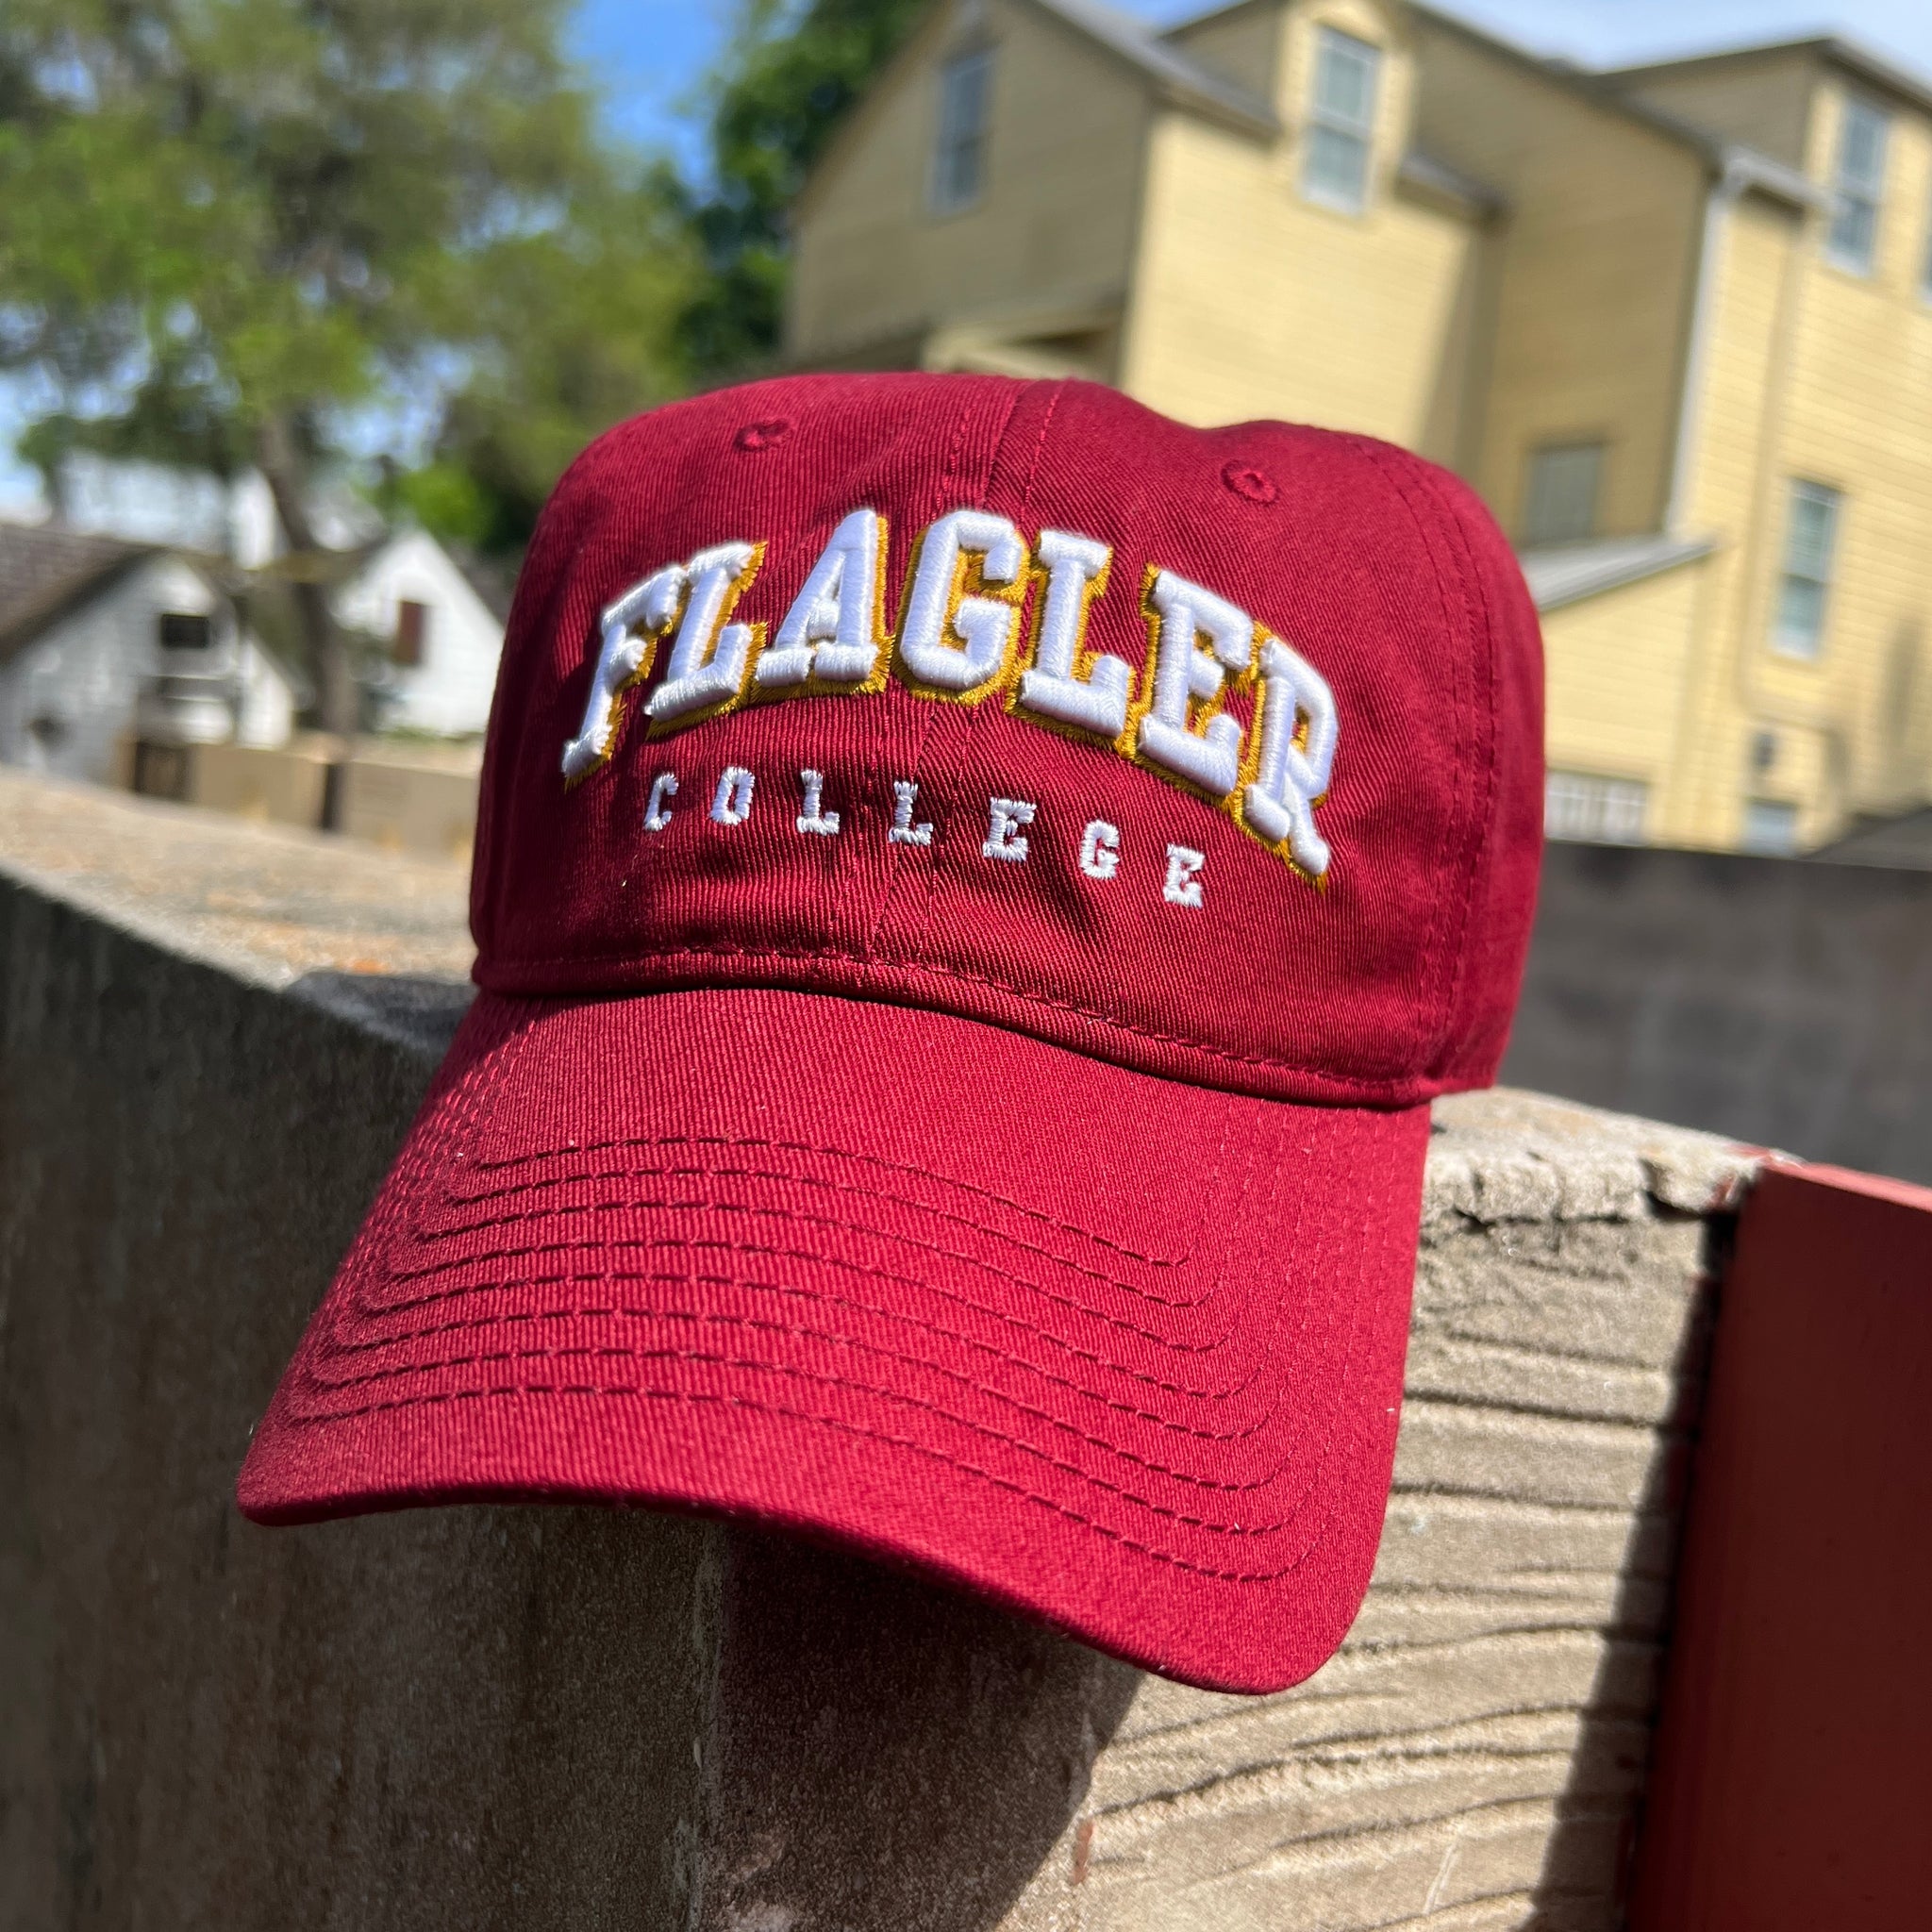 Red hat with white letters saying flagler over white embroider saying College